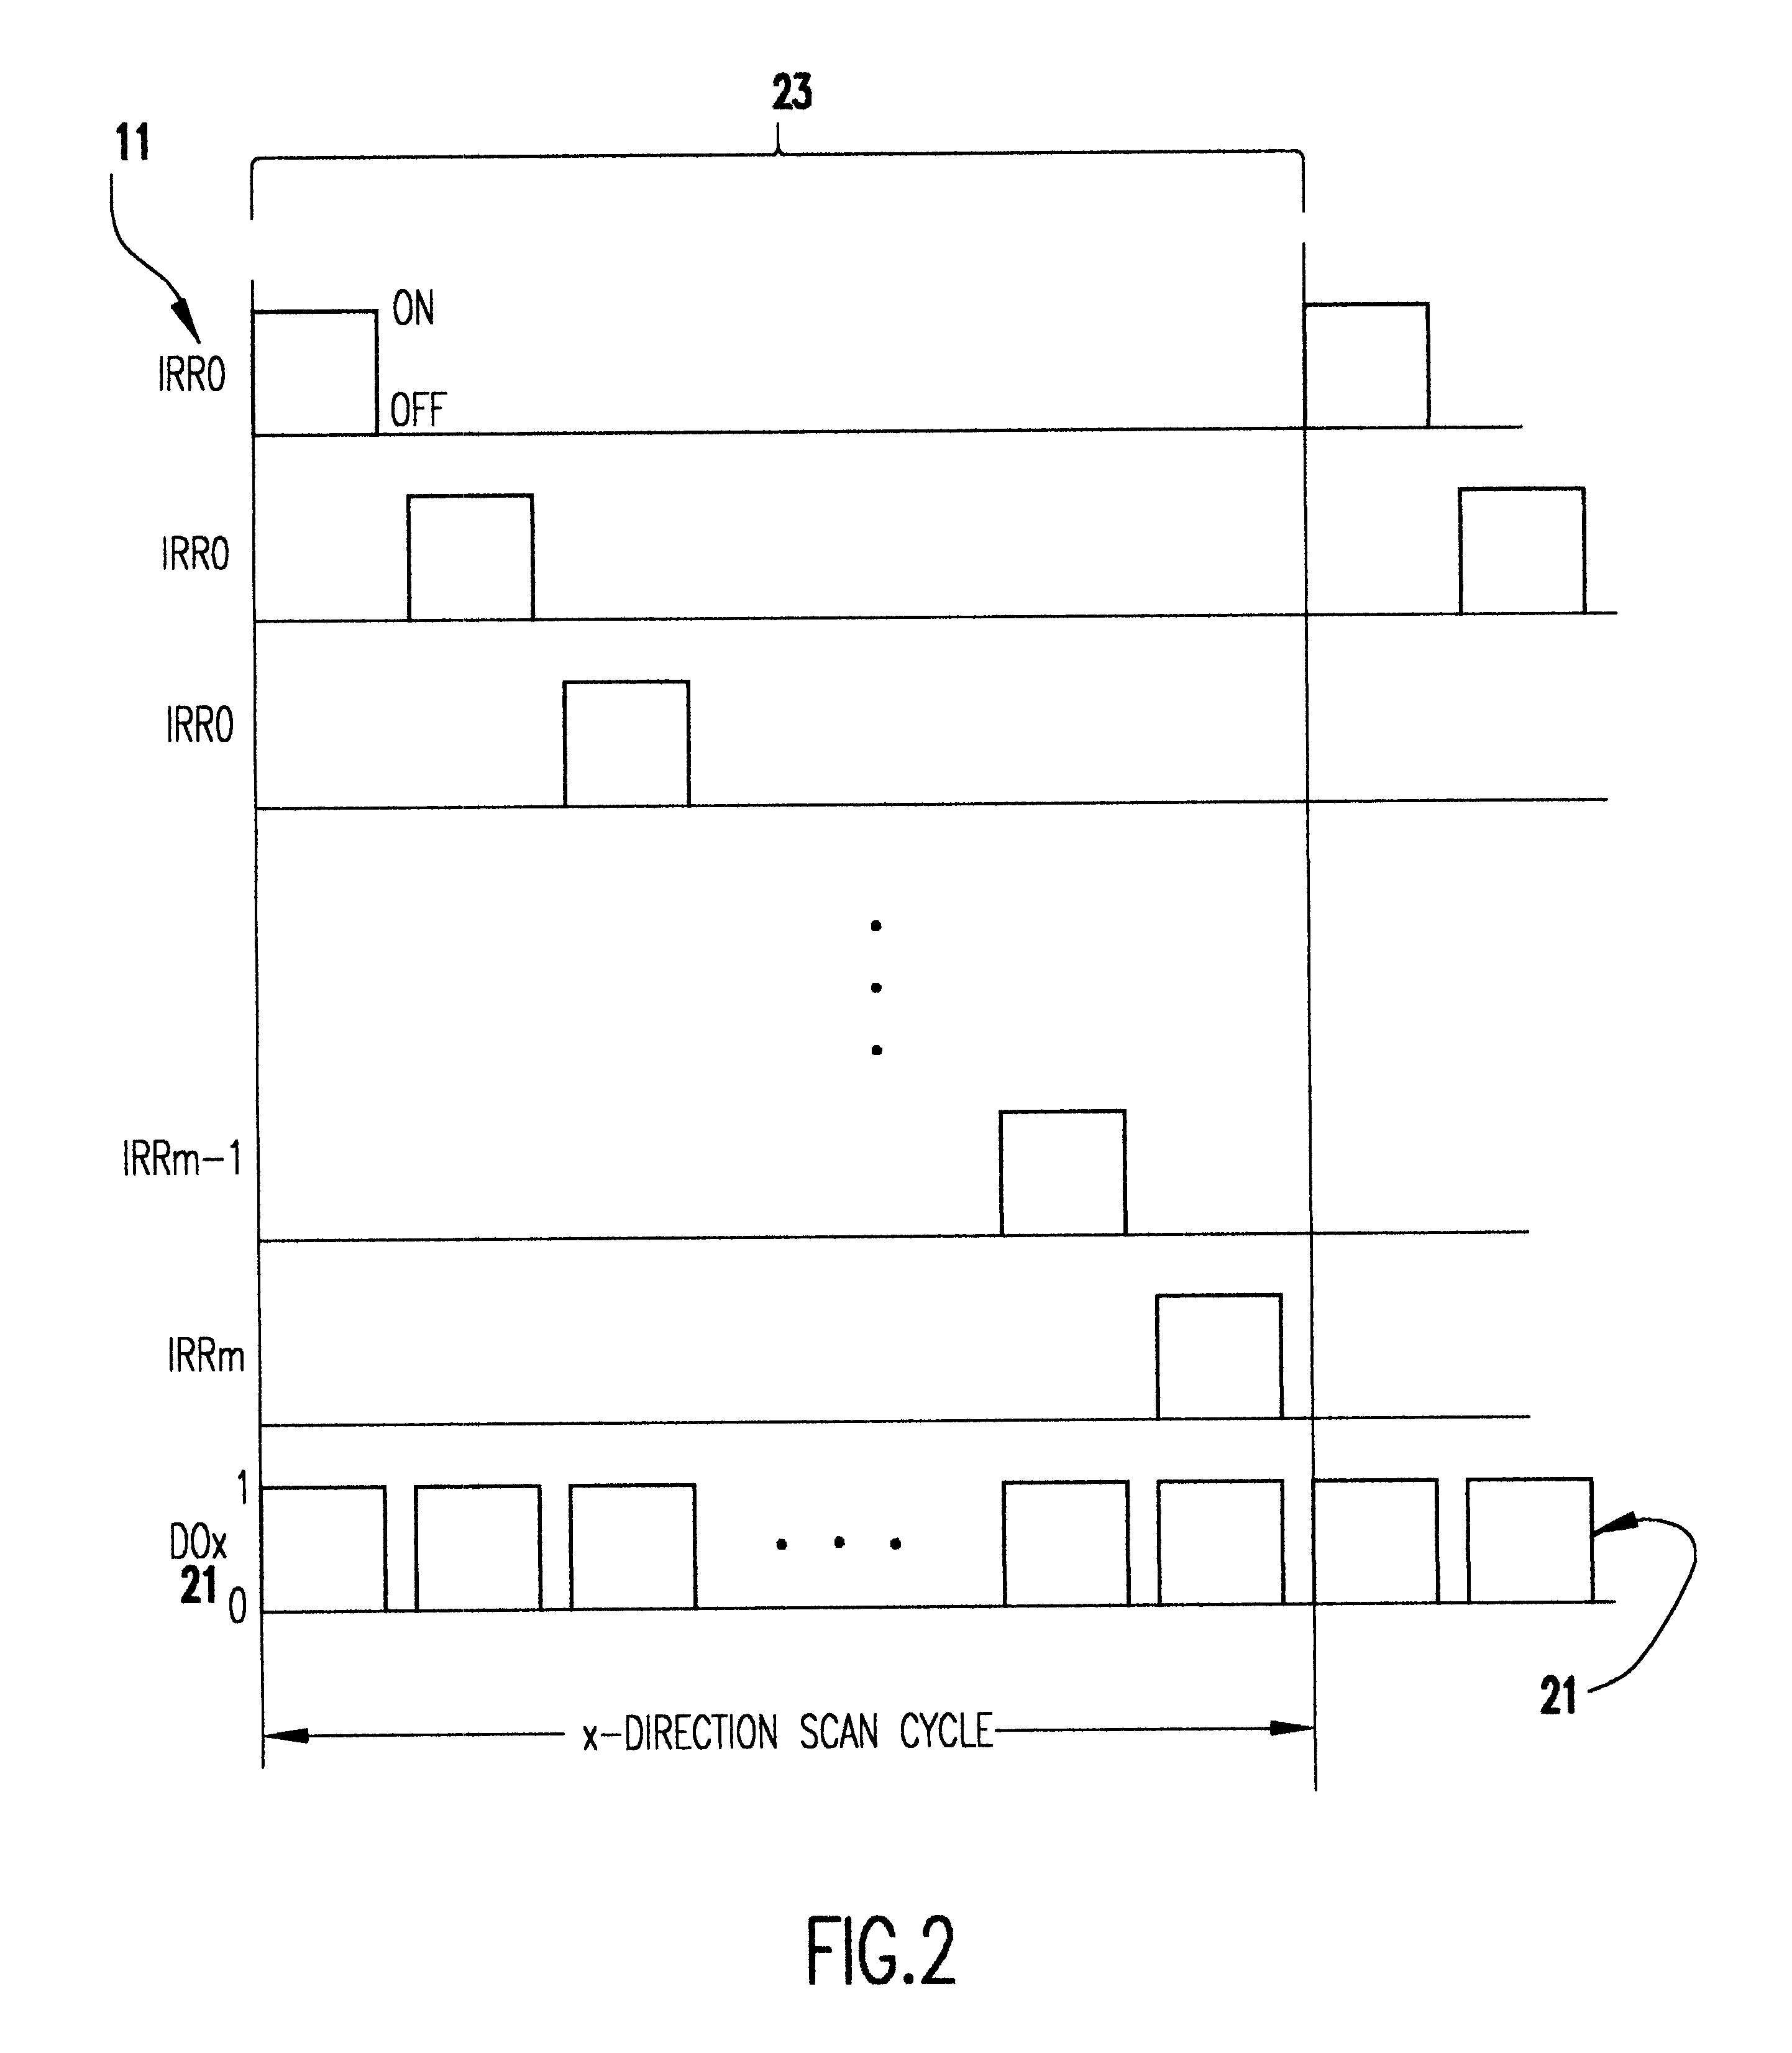 Method and apparatus for mouse positioning device based on infrared light sources and detectors